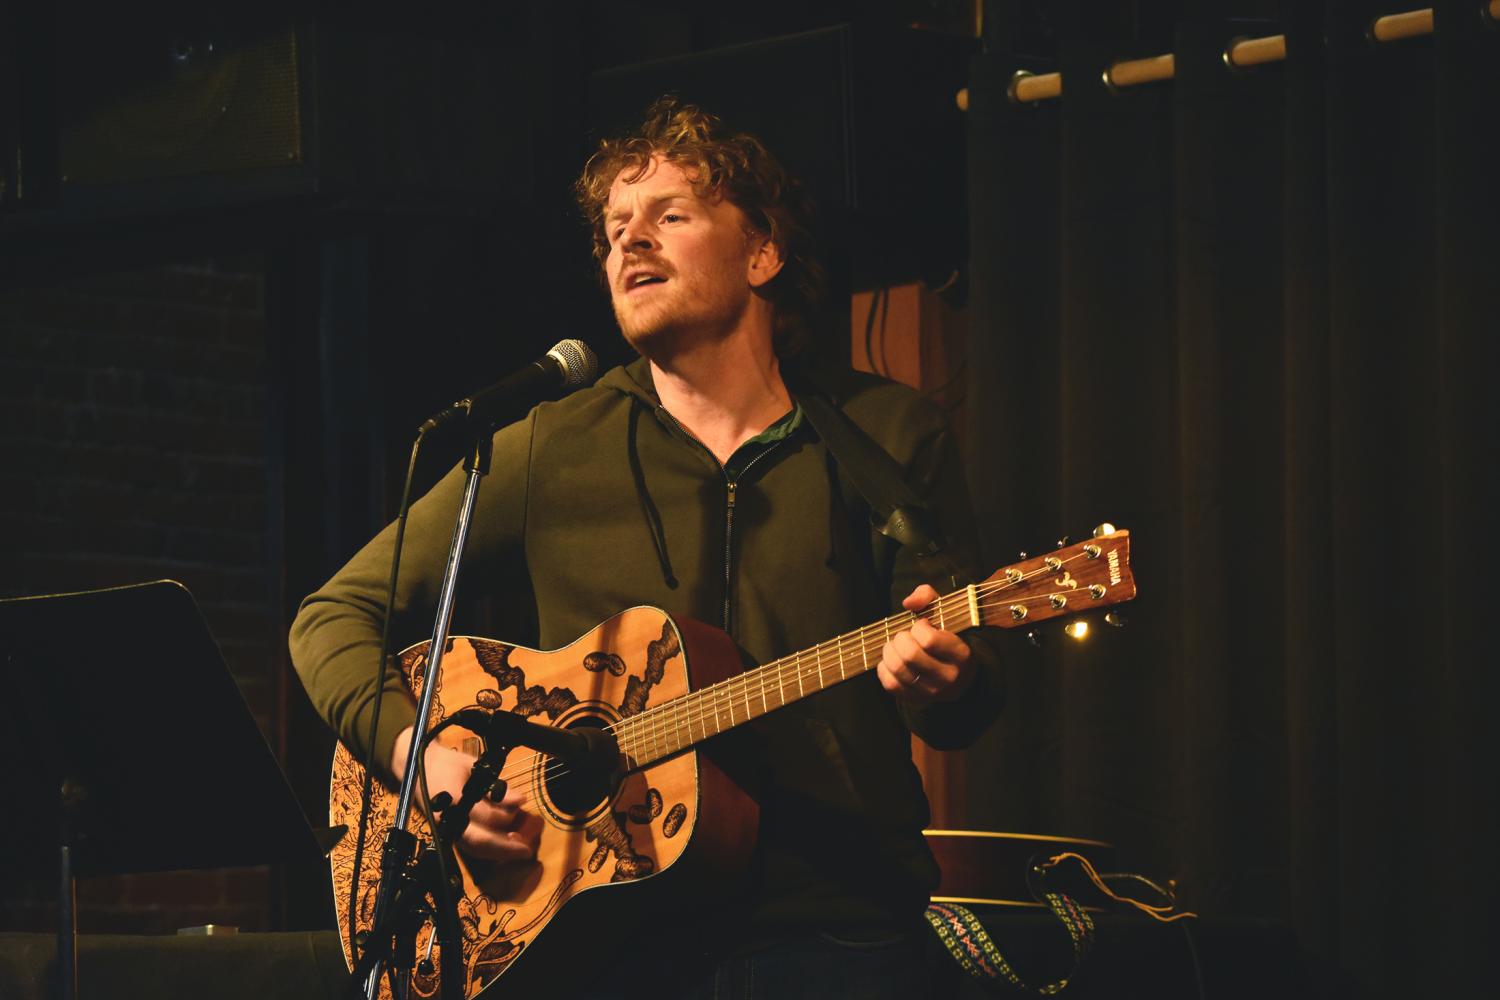 Isaac Backus took the stage for a solo performance at Rico’s Open Mic Night on Monday.